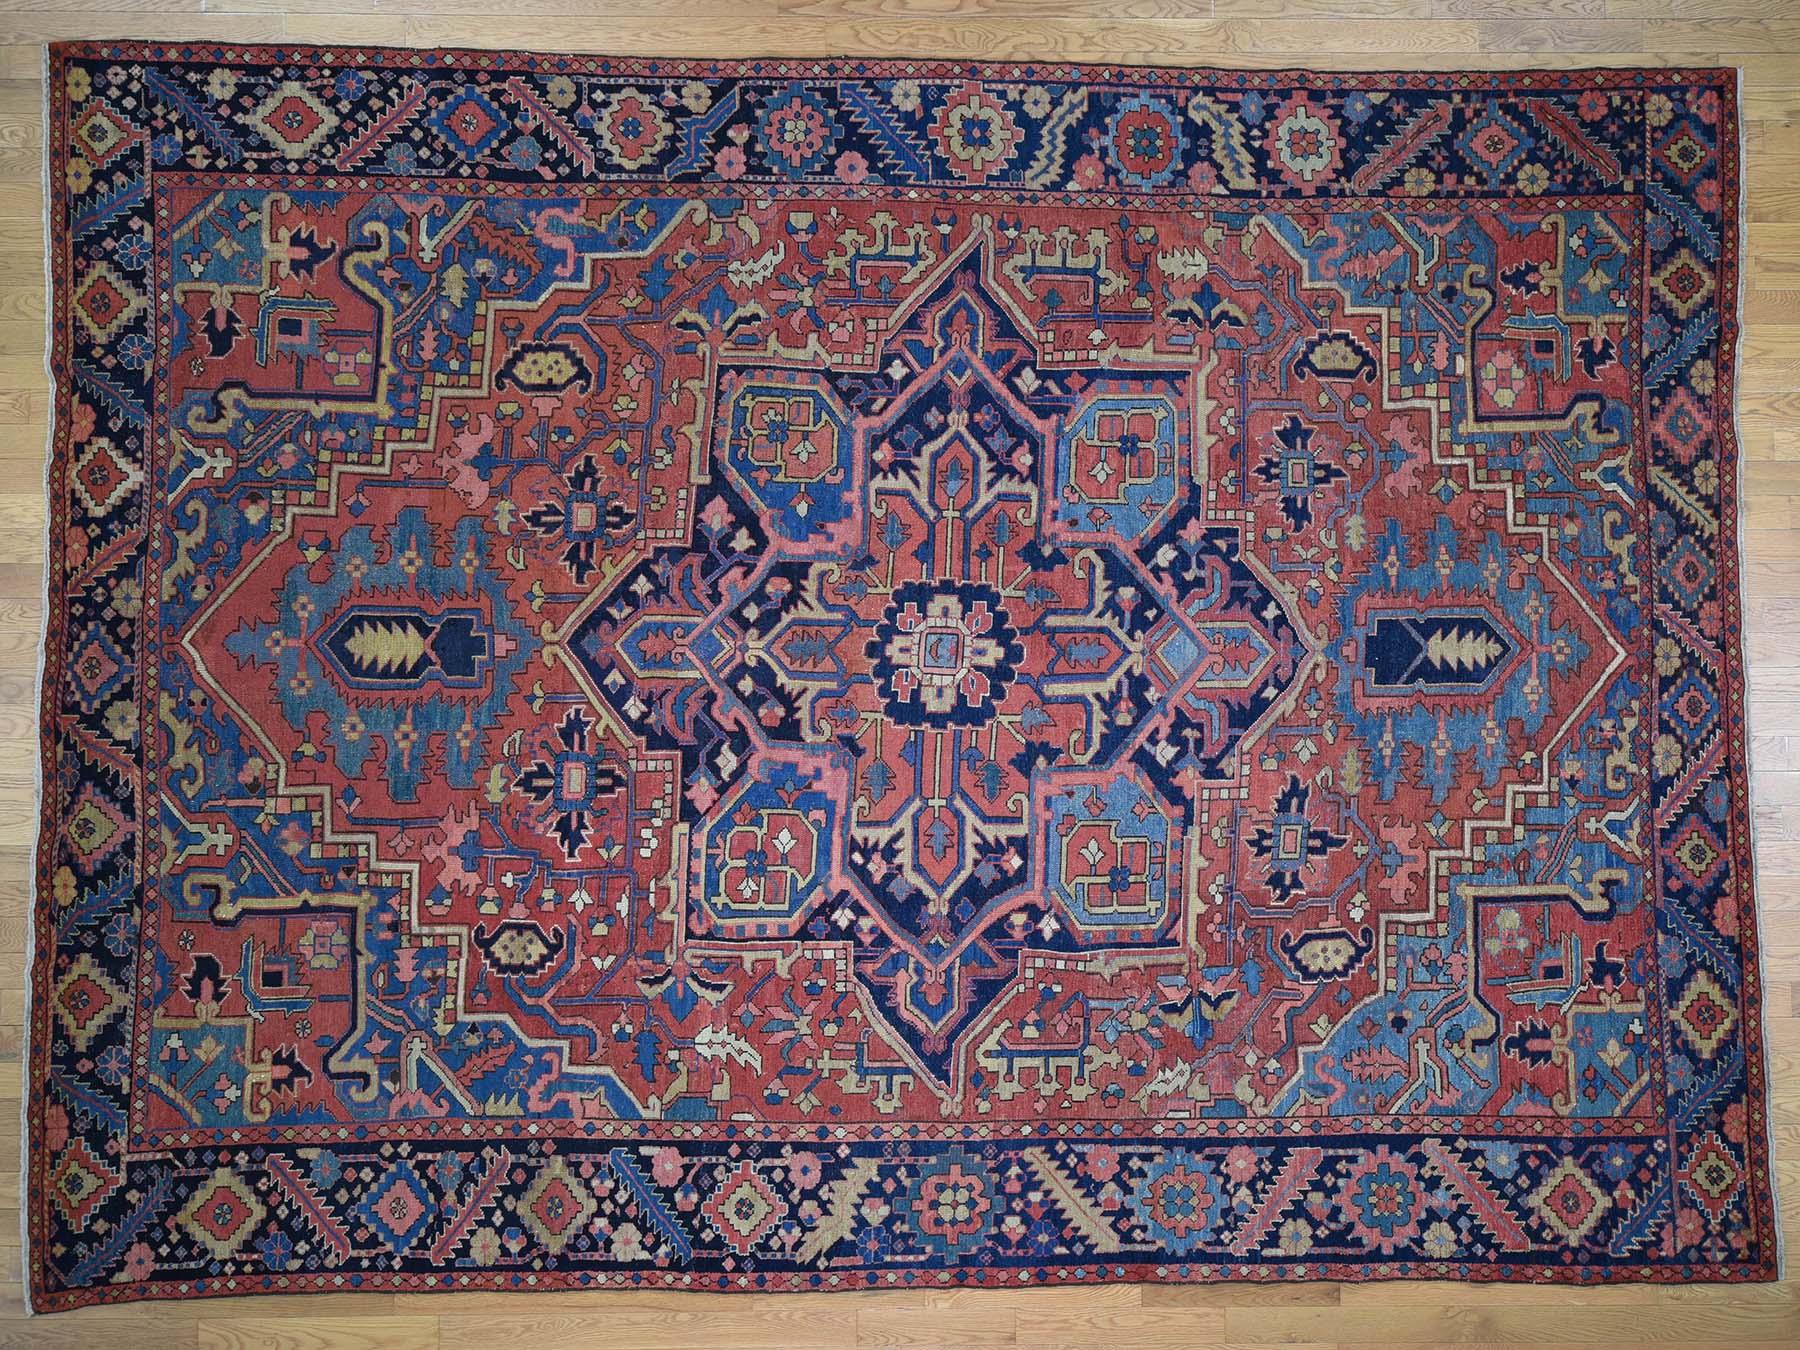 This is a genuine hand knotted oriental rug. It is not hand tufted or machine made rug. Our entire inventory is made of either hand knotted or handwoven rugs.

Renovate your home style with this charming hand knotted red Heriz, is an original pure